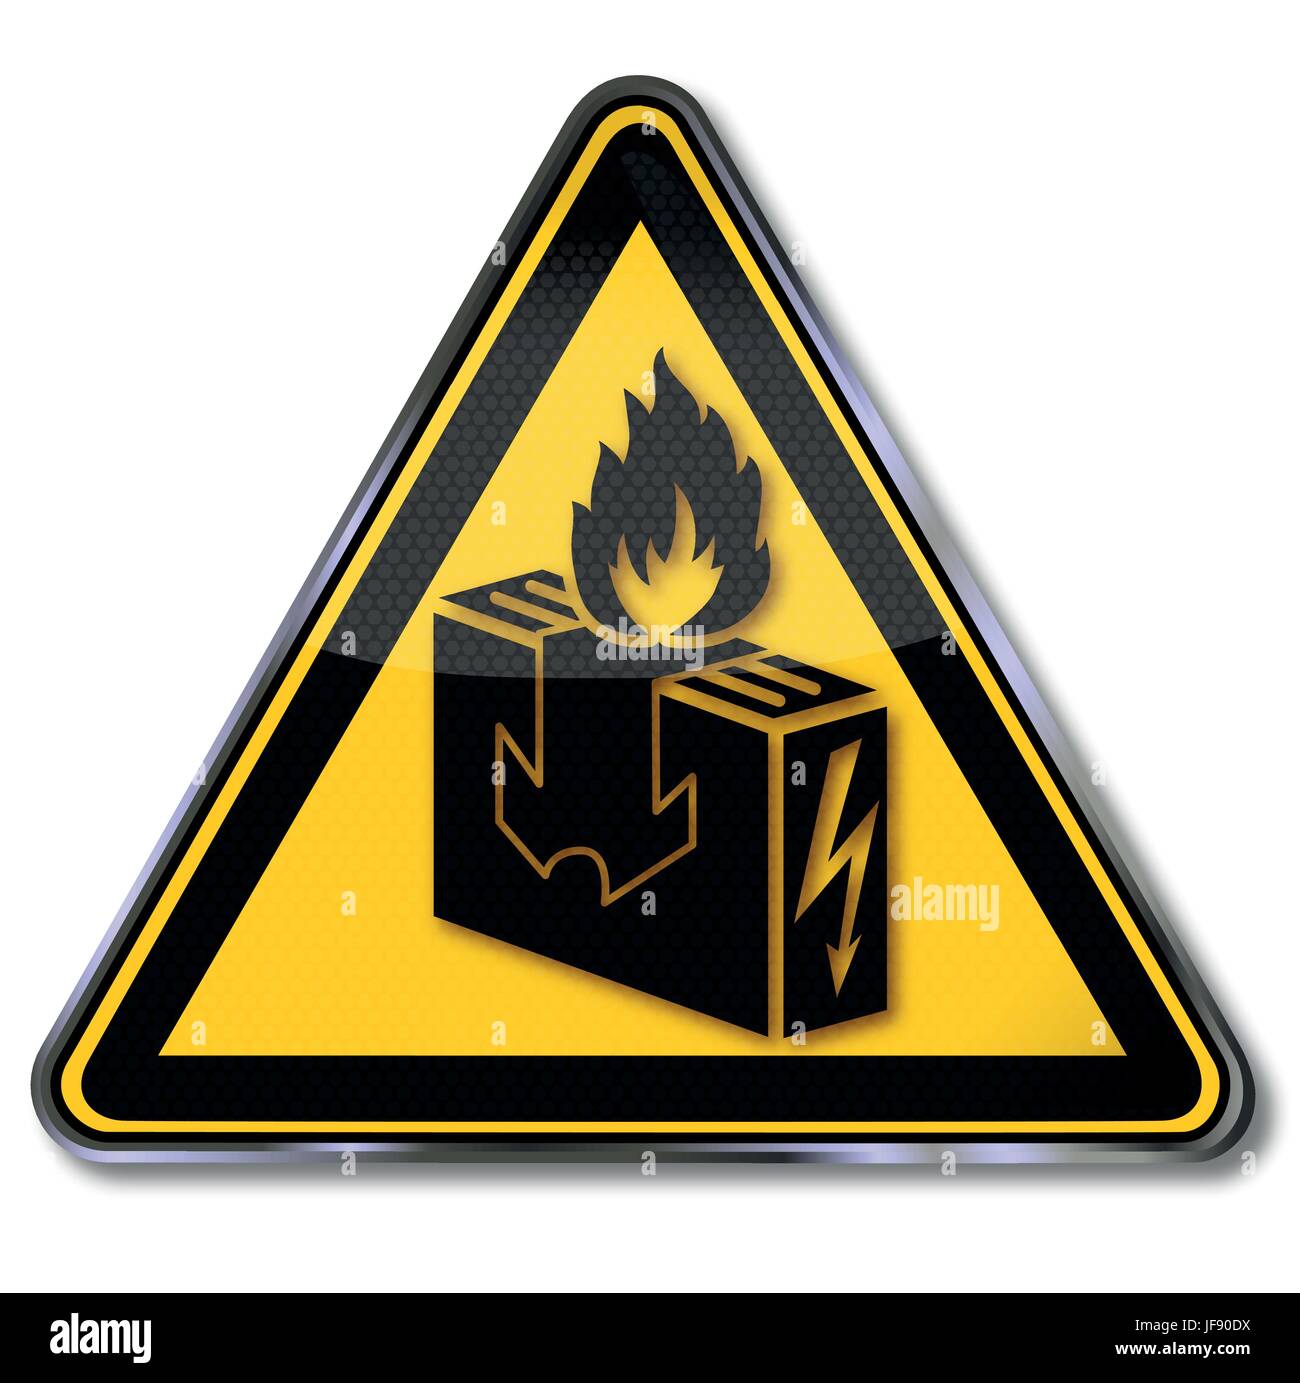 heating, outfit, clothes, clothing, room, danger, risk, industry, accident, Stock Vector